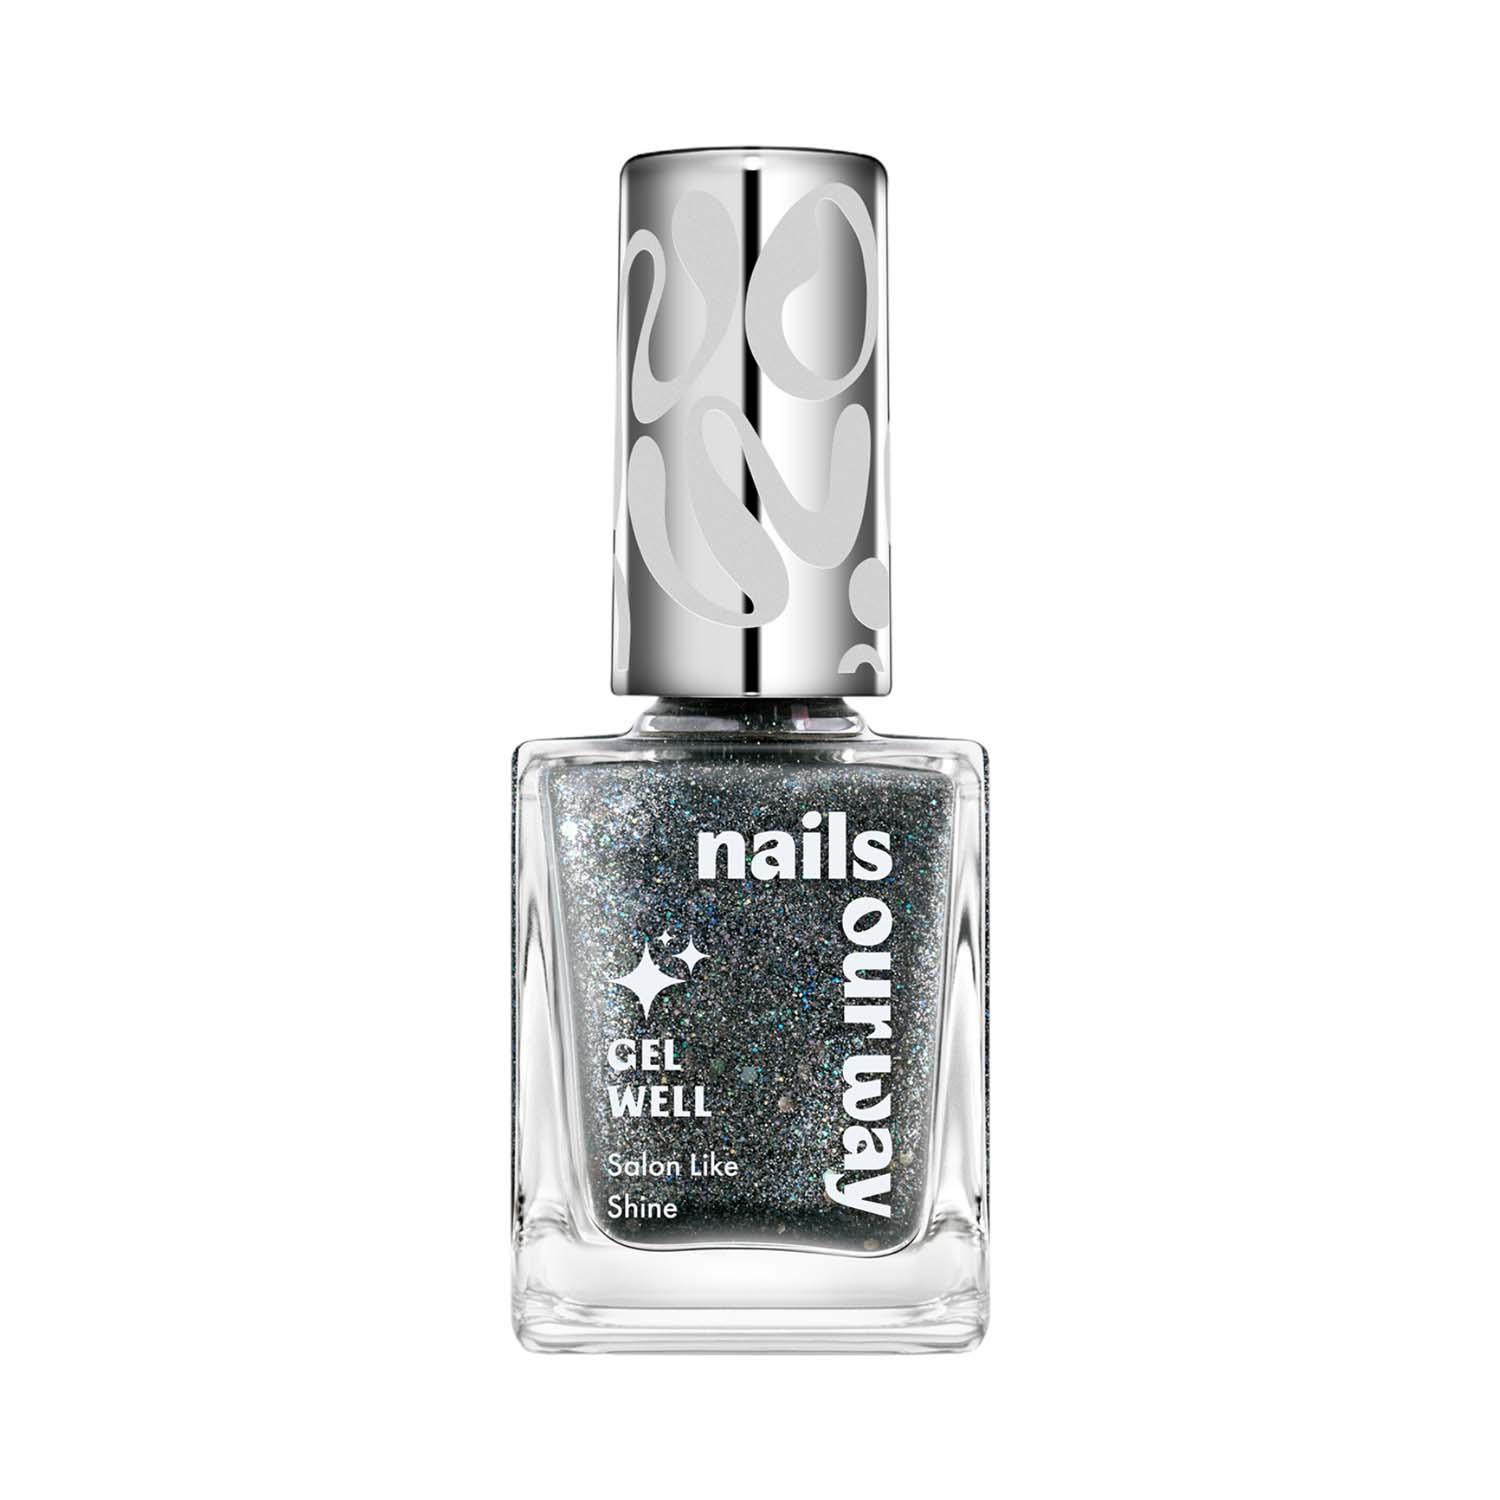 Nails Our Way Gel Well Nail Enamel - 707 Remarkable (10 ml)